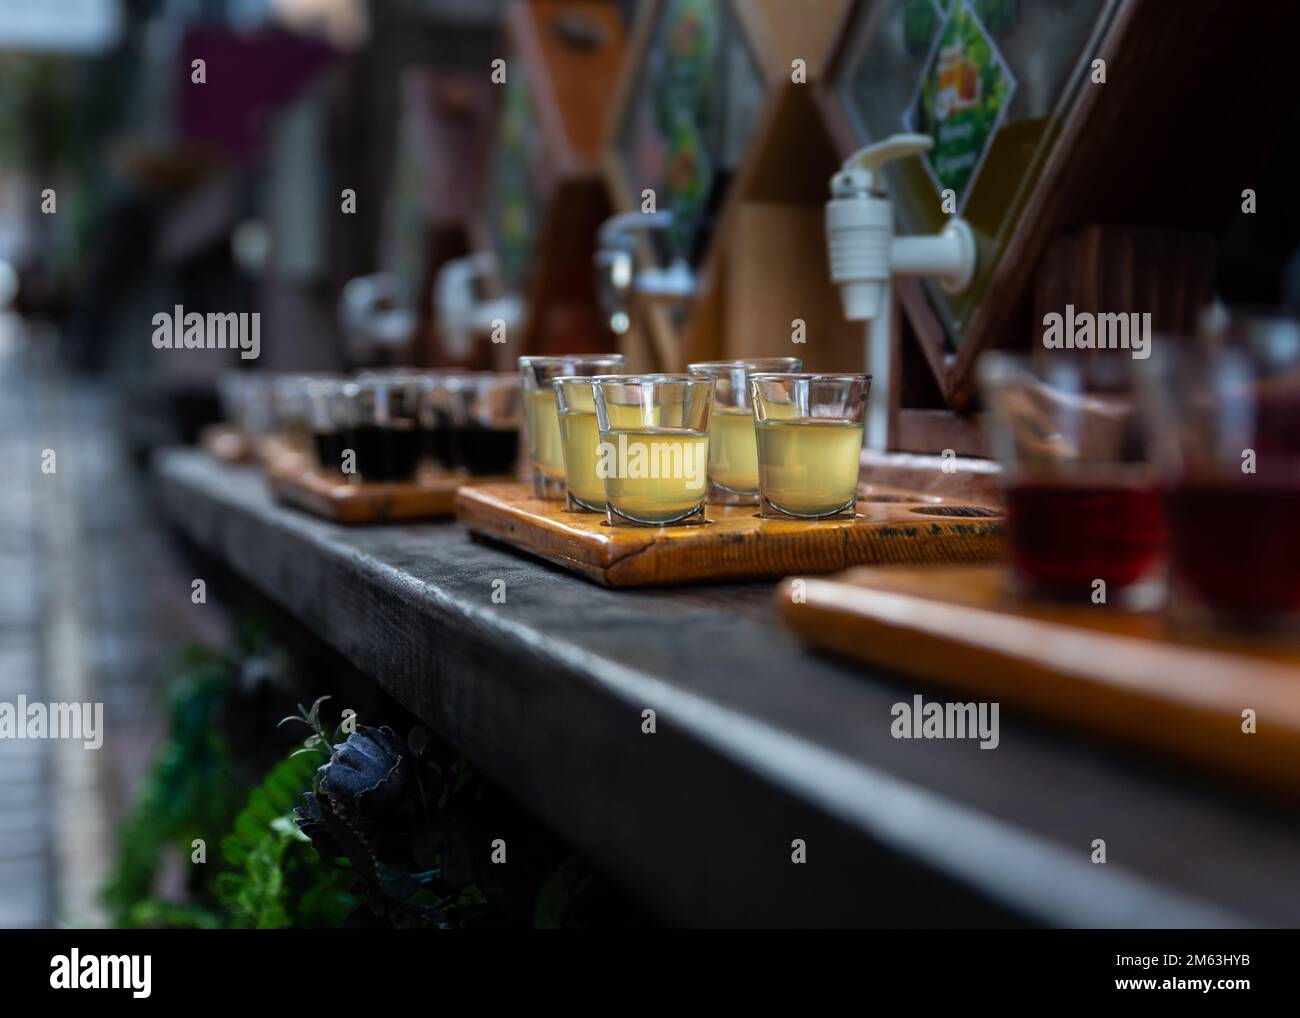 Assortment of hard strong alcoholic drinks and spirits in glasses on bar counter. Stock Photo